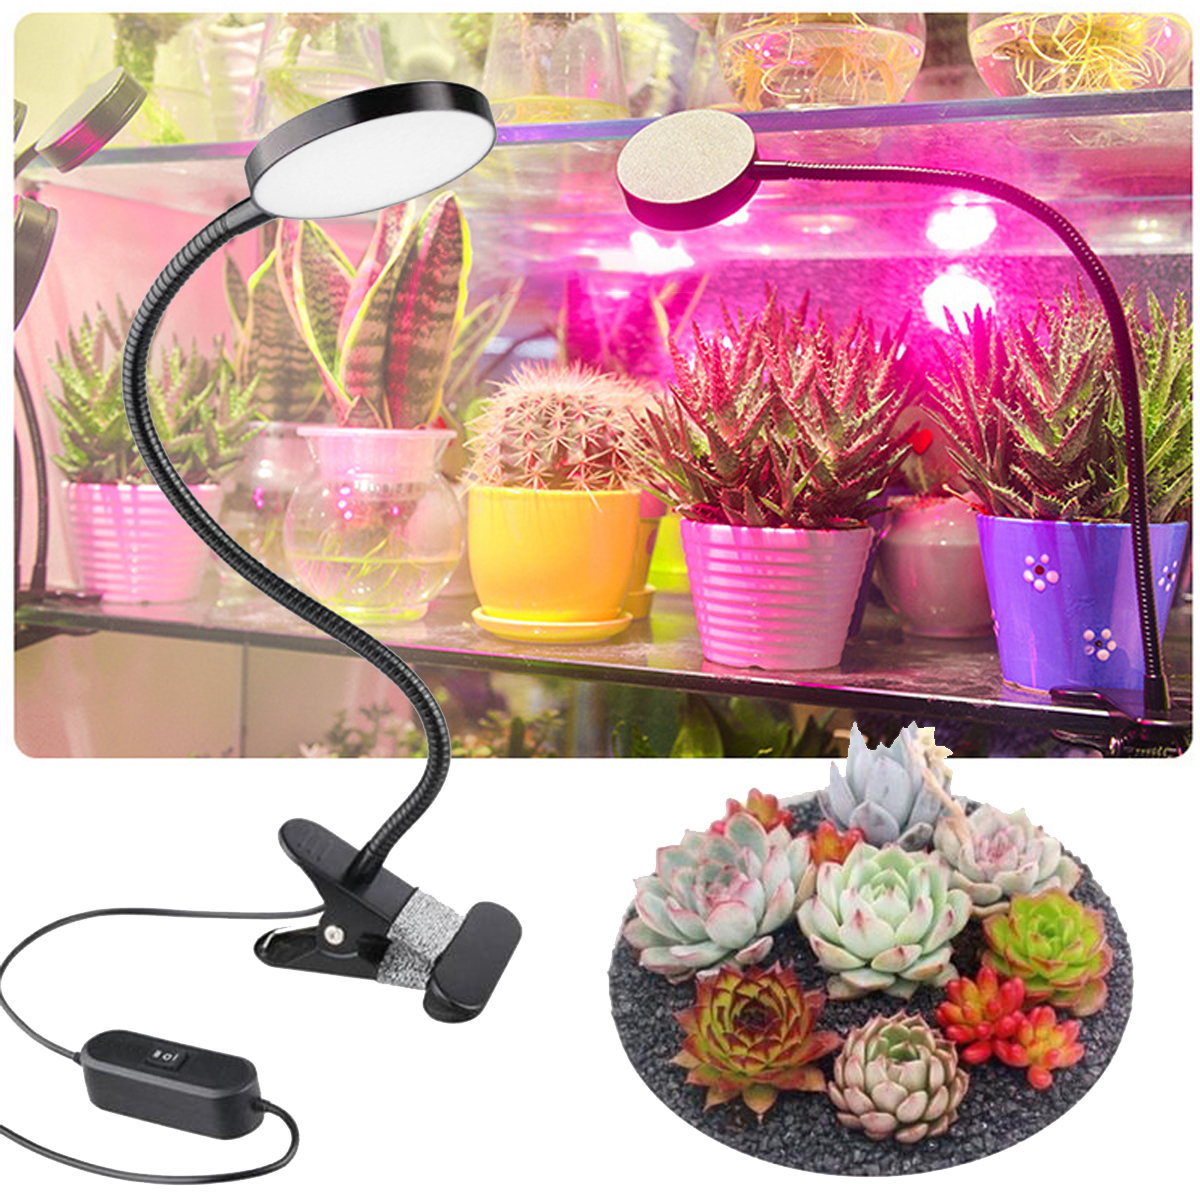 Clip-Plant-Fill-Light-LED-Grow-Light-Fleshy-Planting-Double-Head-Timing-With-Clips-Like-Sun-1388863-9